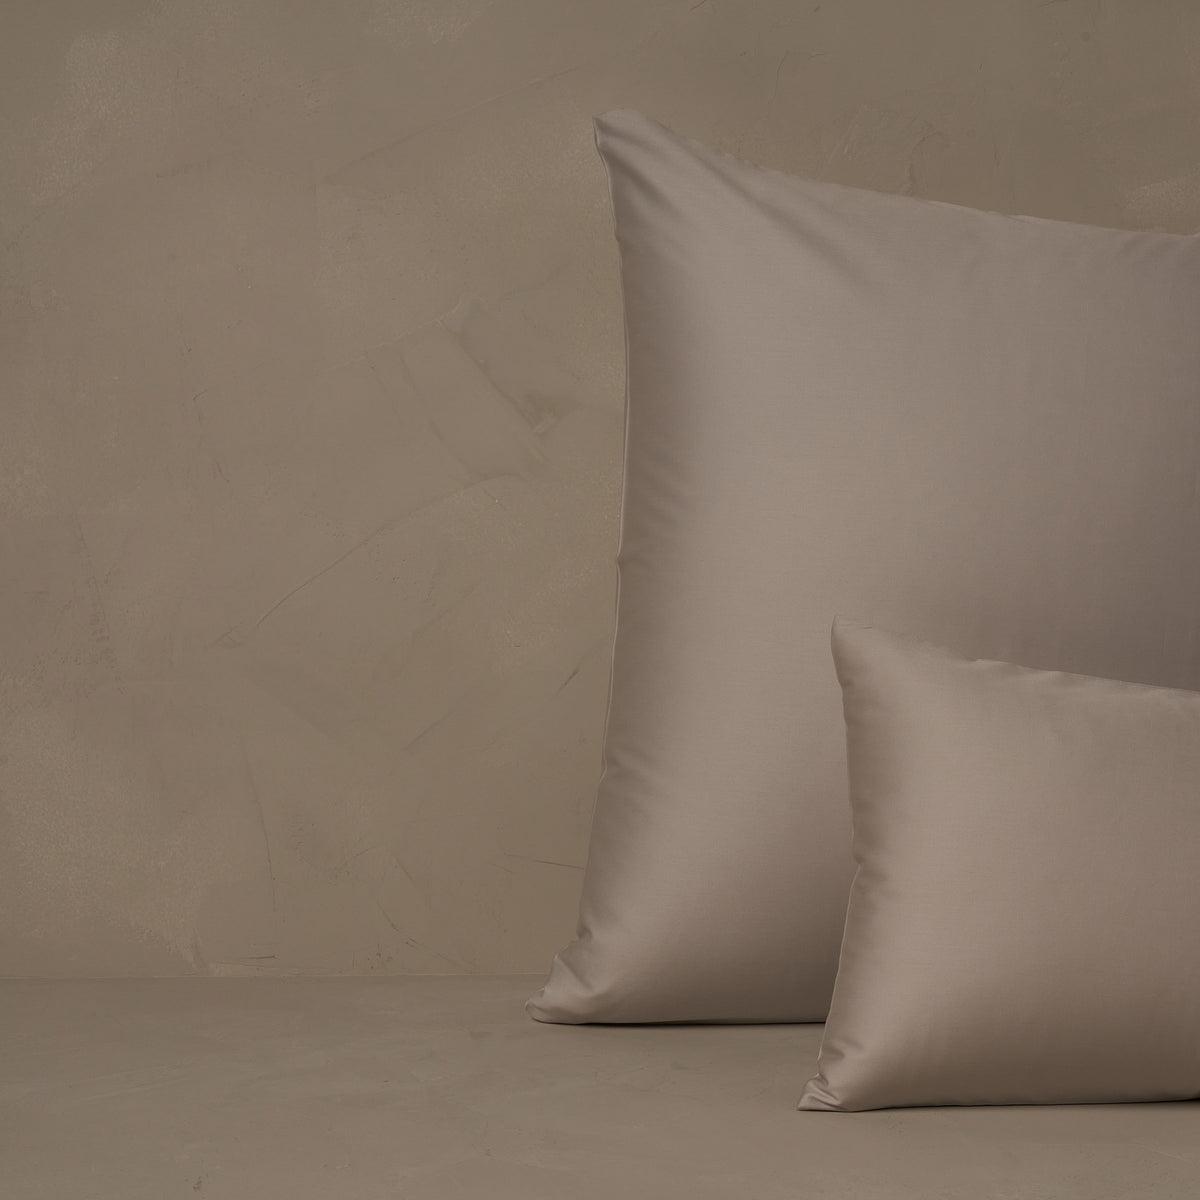 An image of a small boudoir or travel size pillow stacked in front of a large euro size pillow. The pillow cases are made of LETTO's warm and buttery Classic Cotton Sateen in color gray. data-image-id=